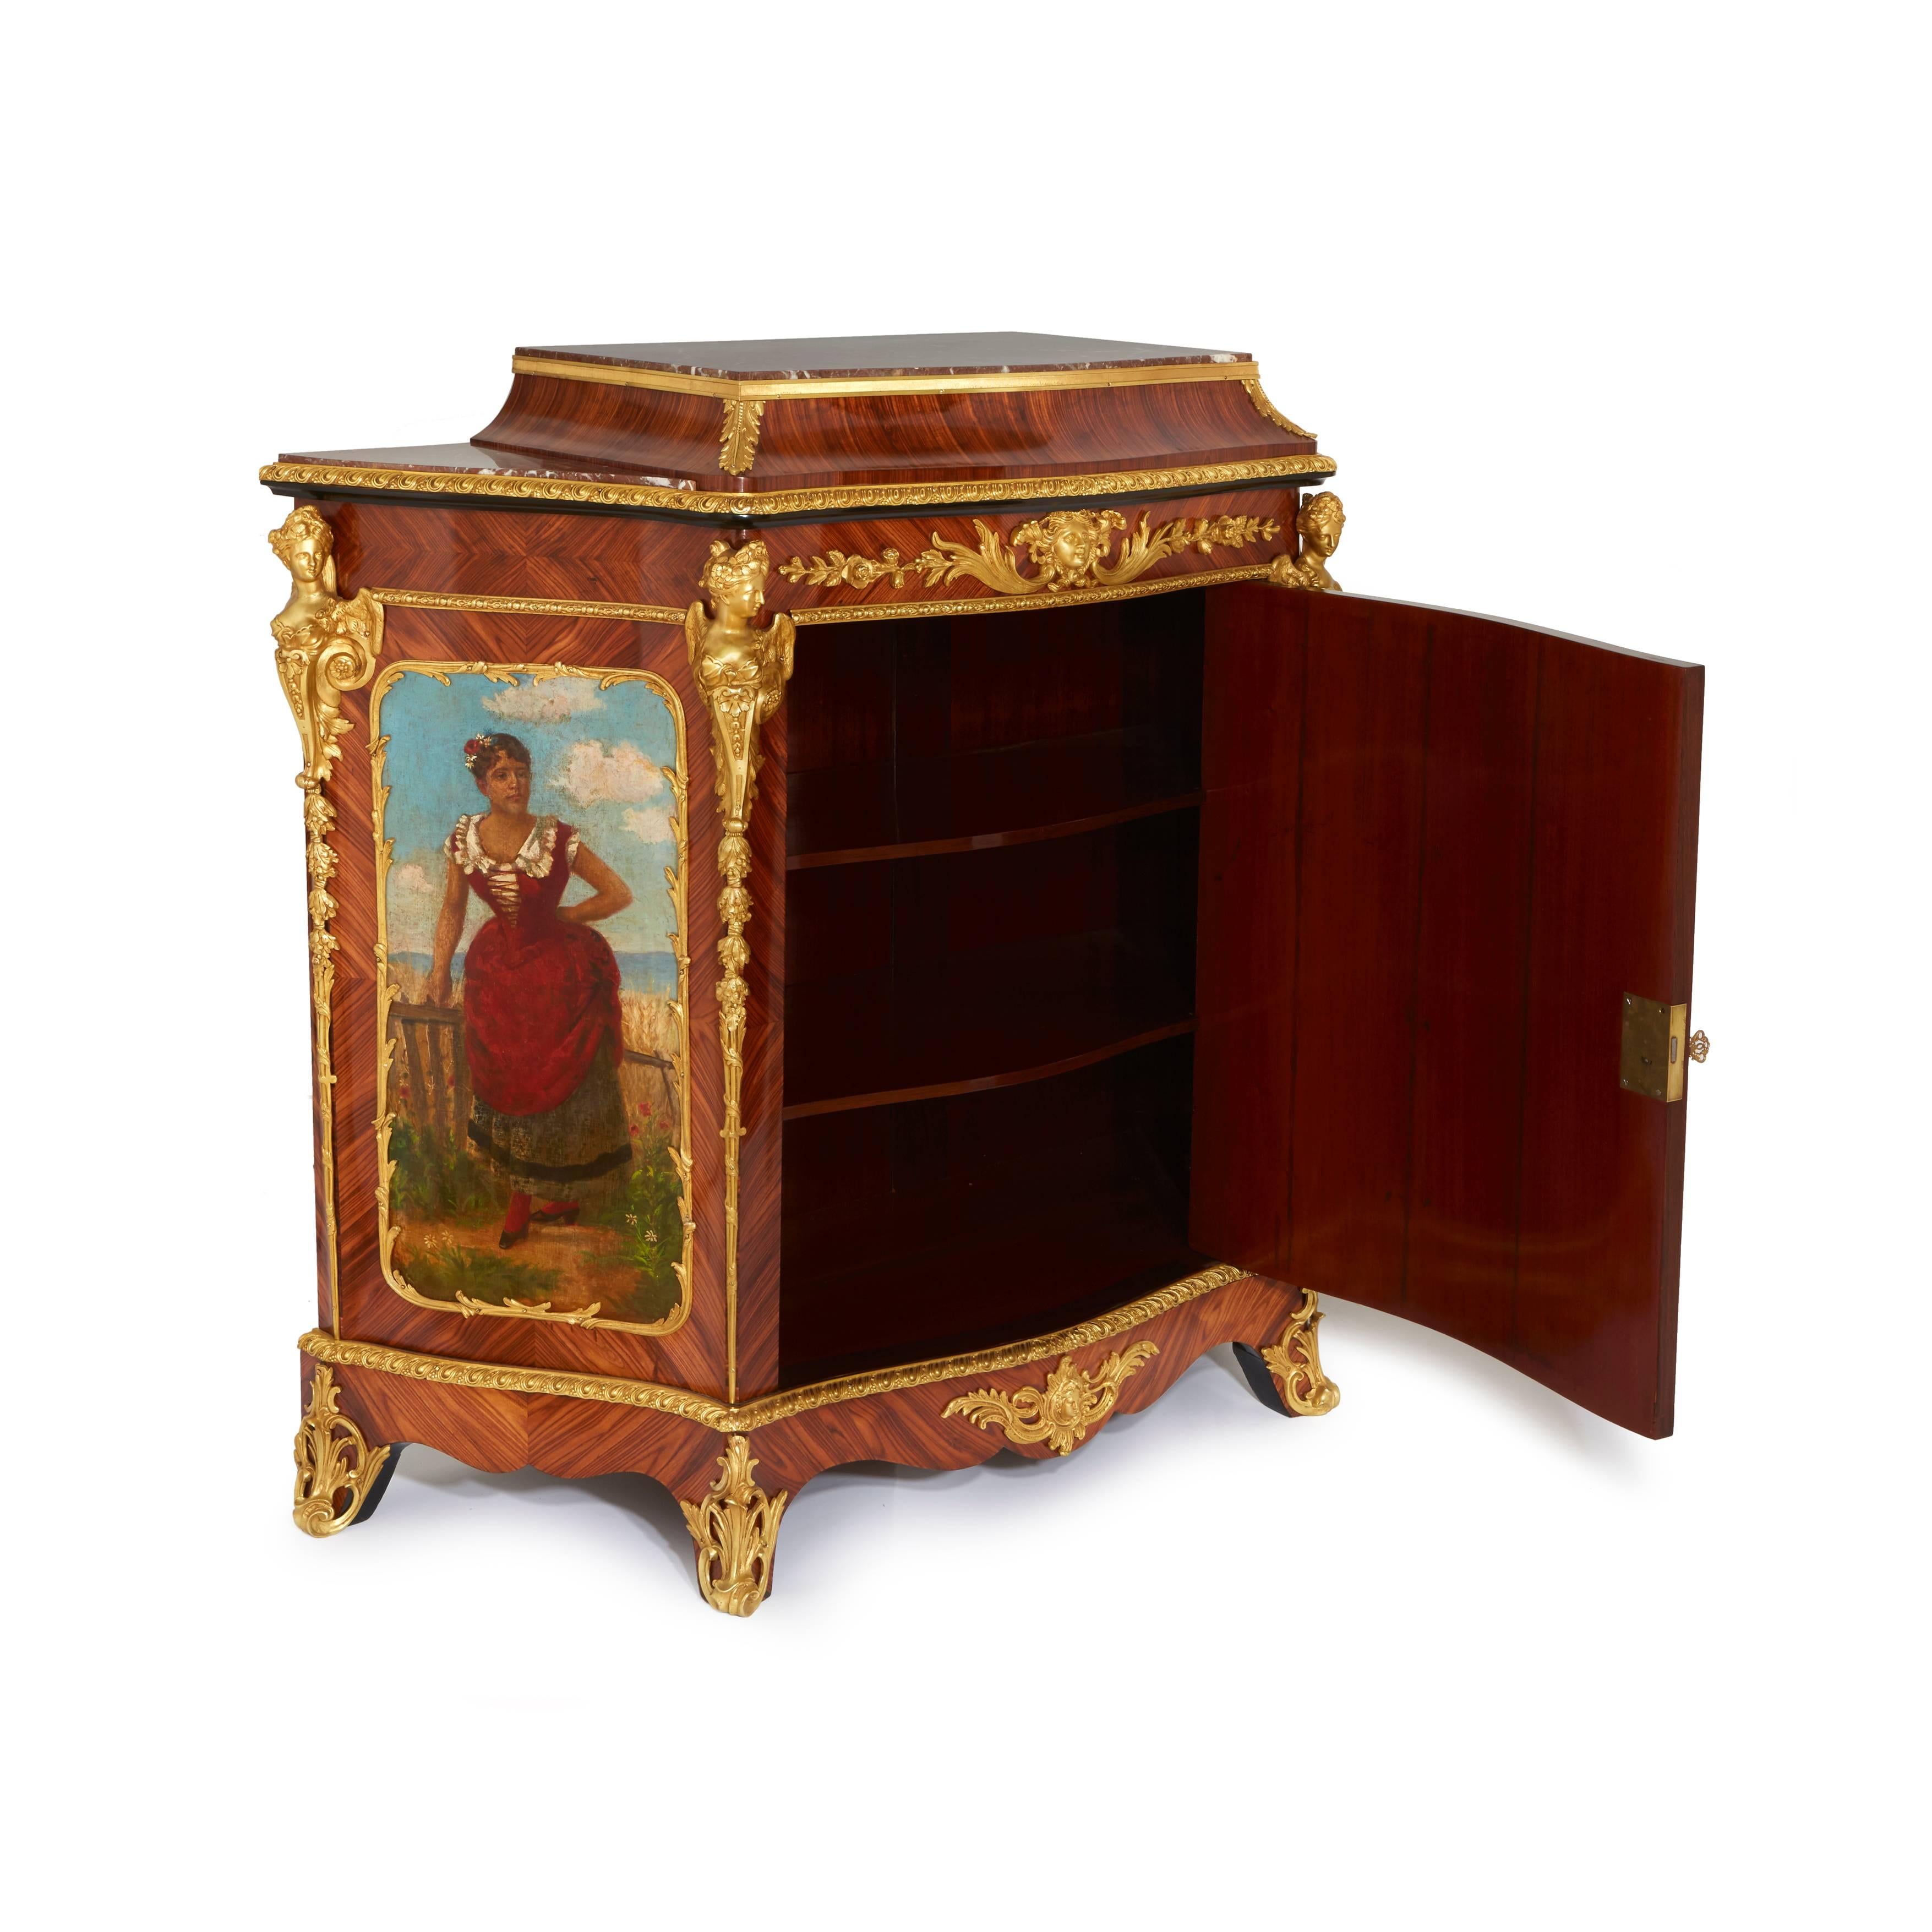 The ormolu mounted painted and tulipwood side cabinets decorated in the Louis XV style, each cabinet with marble tops on a raised platform decorated with floral garlands, above a central ormolu frieze centered by a female bust and floral decor to